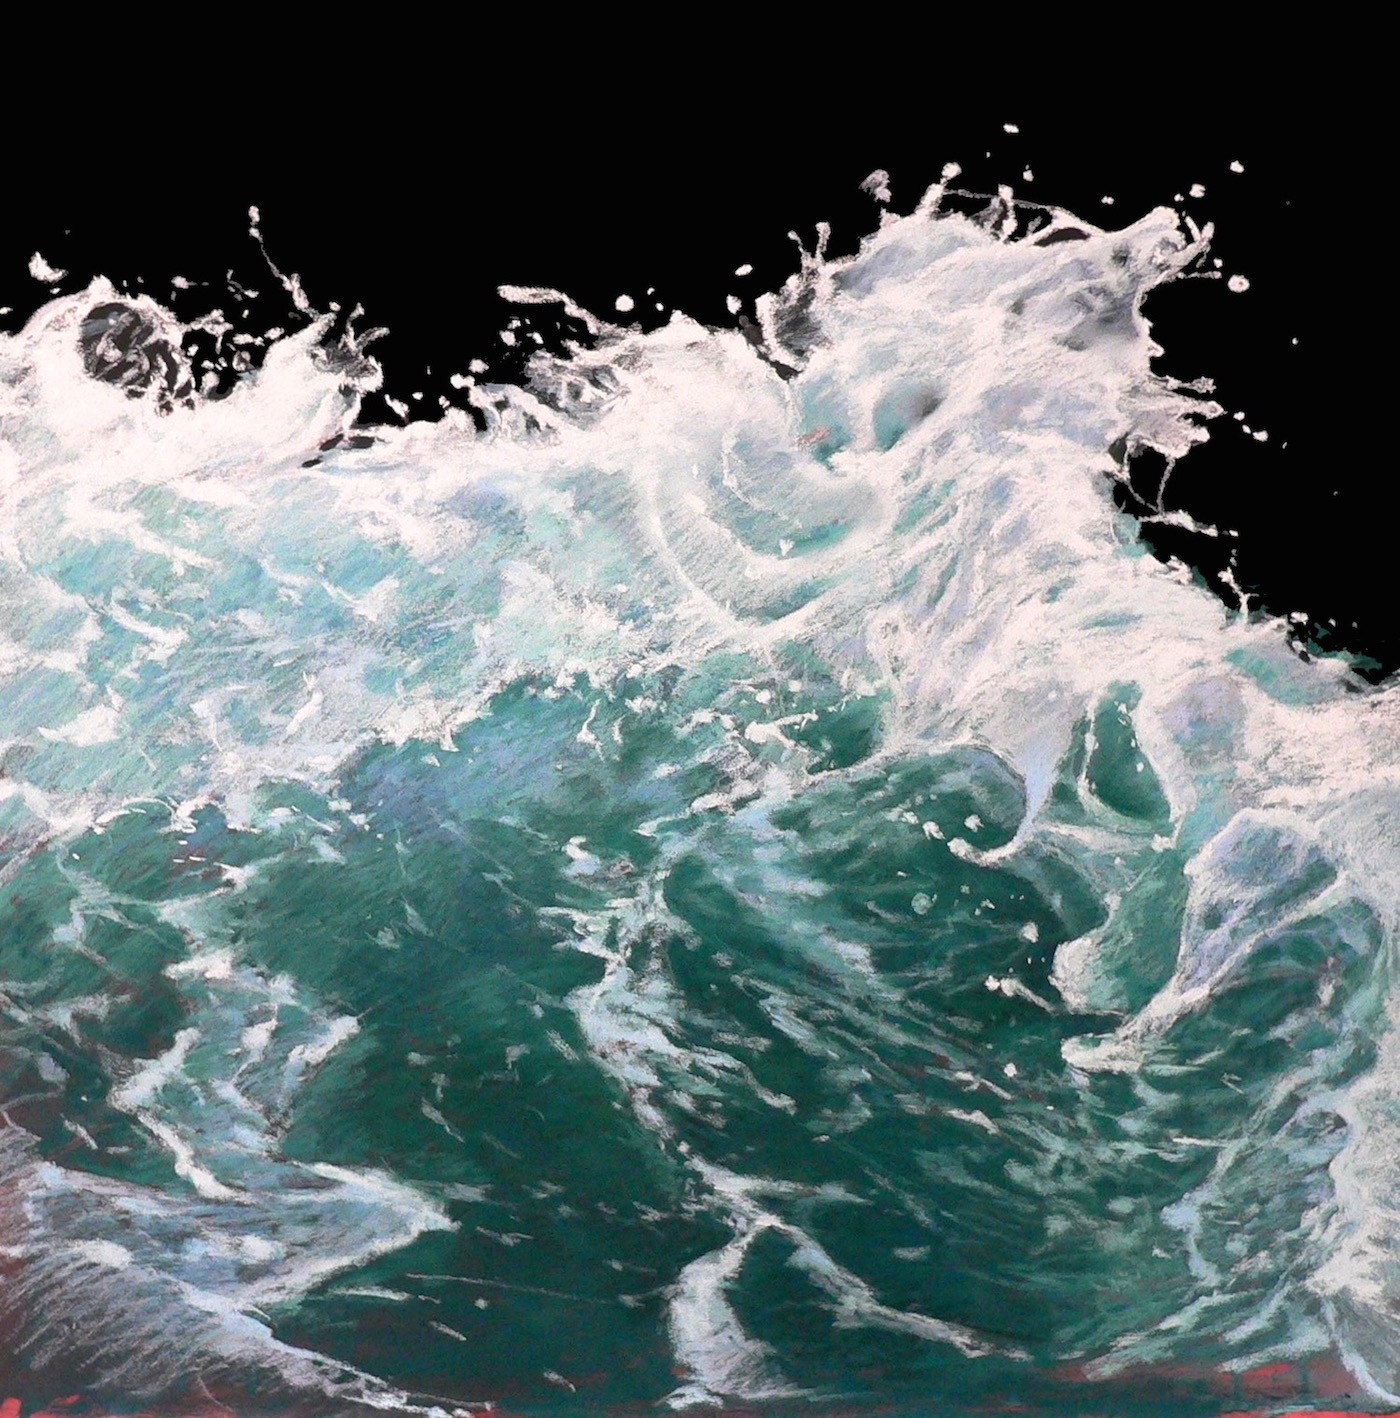 Jessica Masters, "Wave 17," 2018, pastel on board, 29 x 29 in. Available.